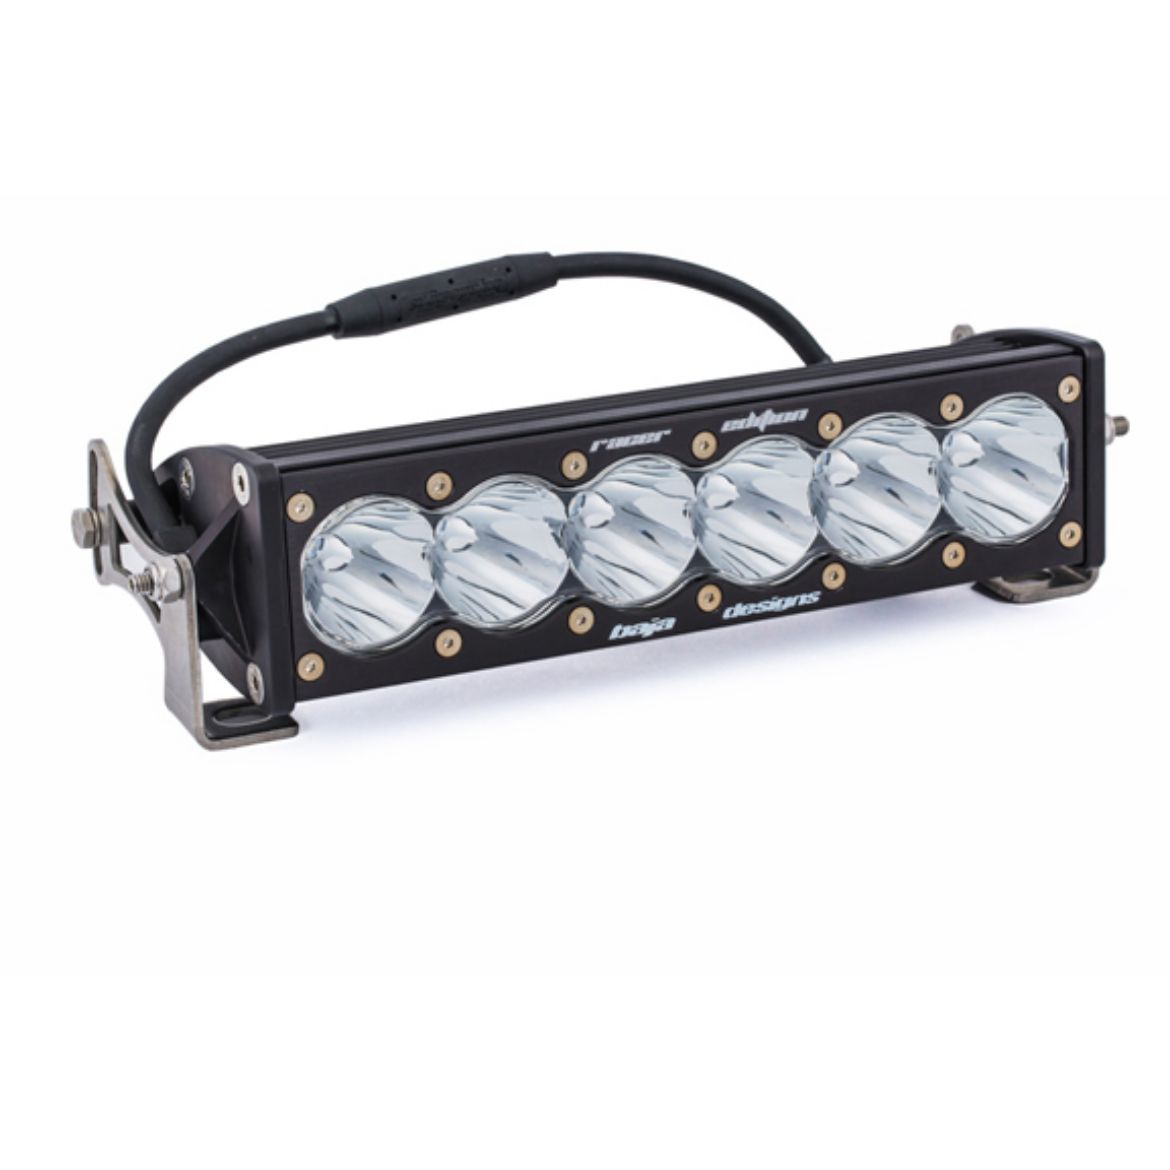 Picture of 10 Inch LED Light Bar High Speed Spot Racer Edition OnX6 Baja Designs